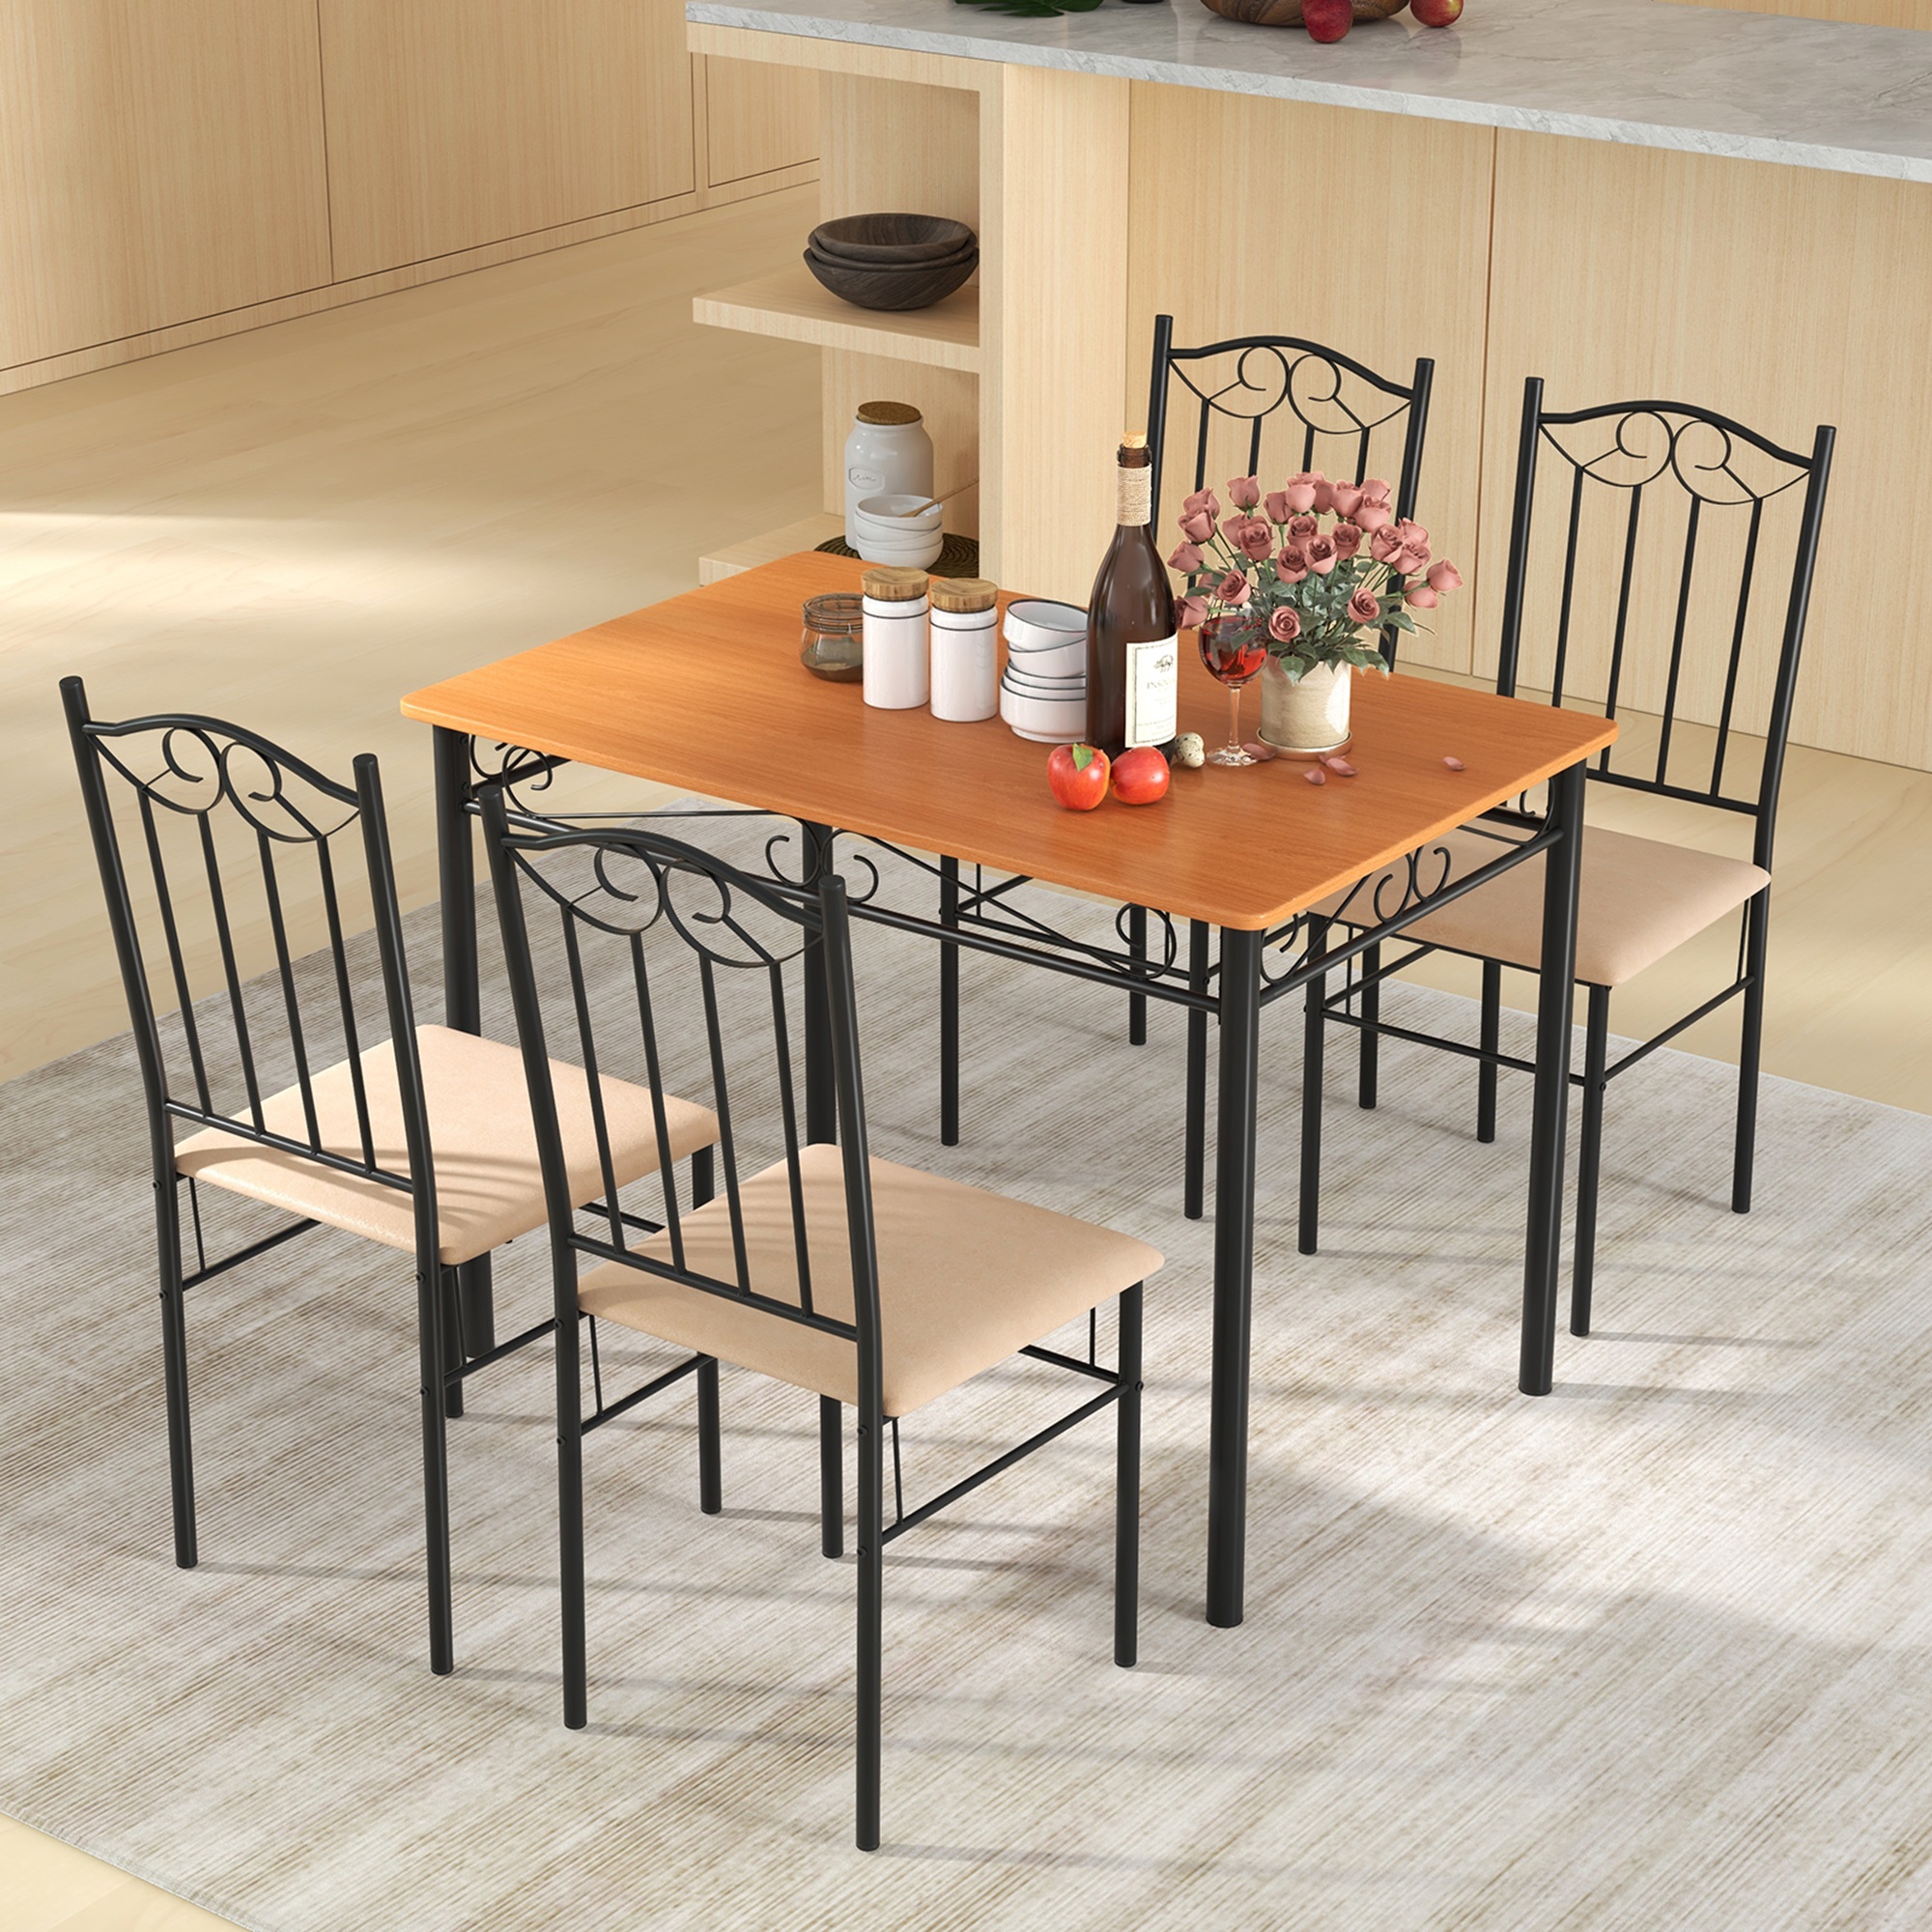 Costway 5 PC Dining Set Wood Metal 30" Table and 4 Chairs Black Kitchen Breakfast Furniture - image 4 of 8